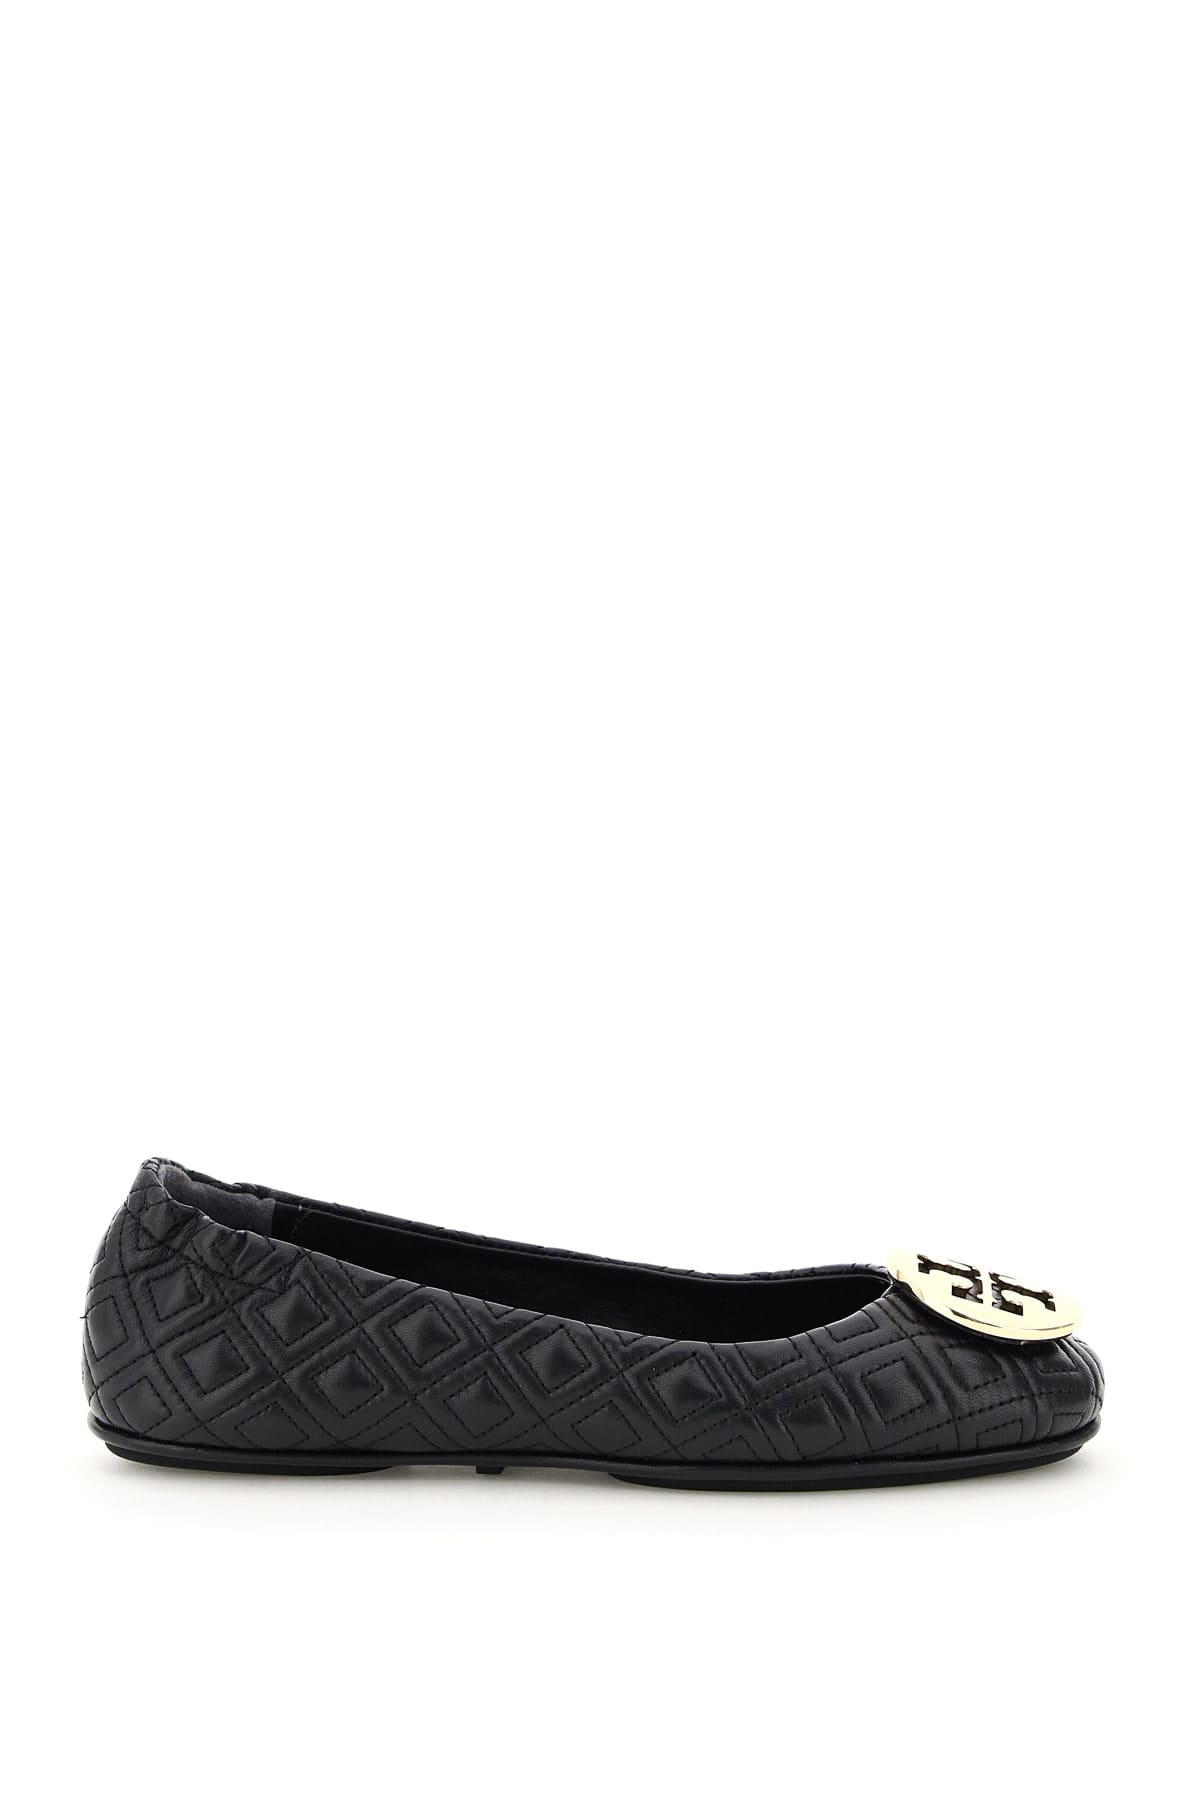 Buy Tory Burch Quilted Minnie Ballerinas online, shop Tory Burch shoes with free shipping